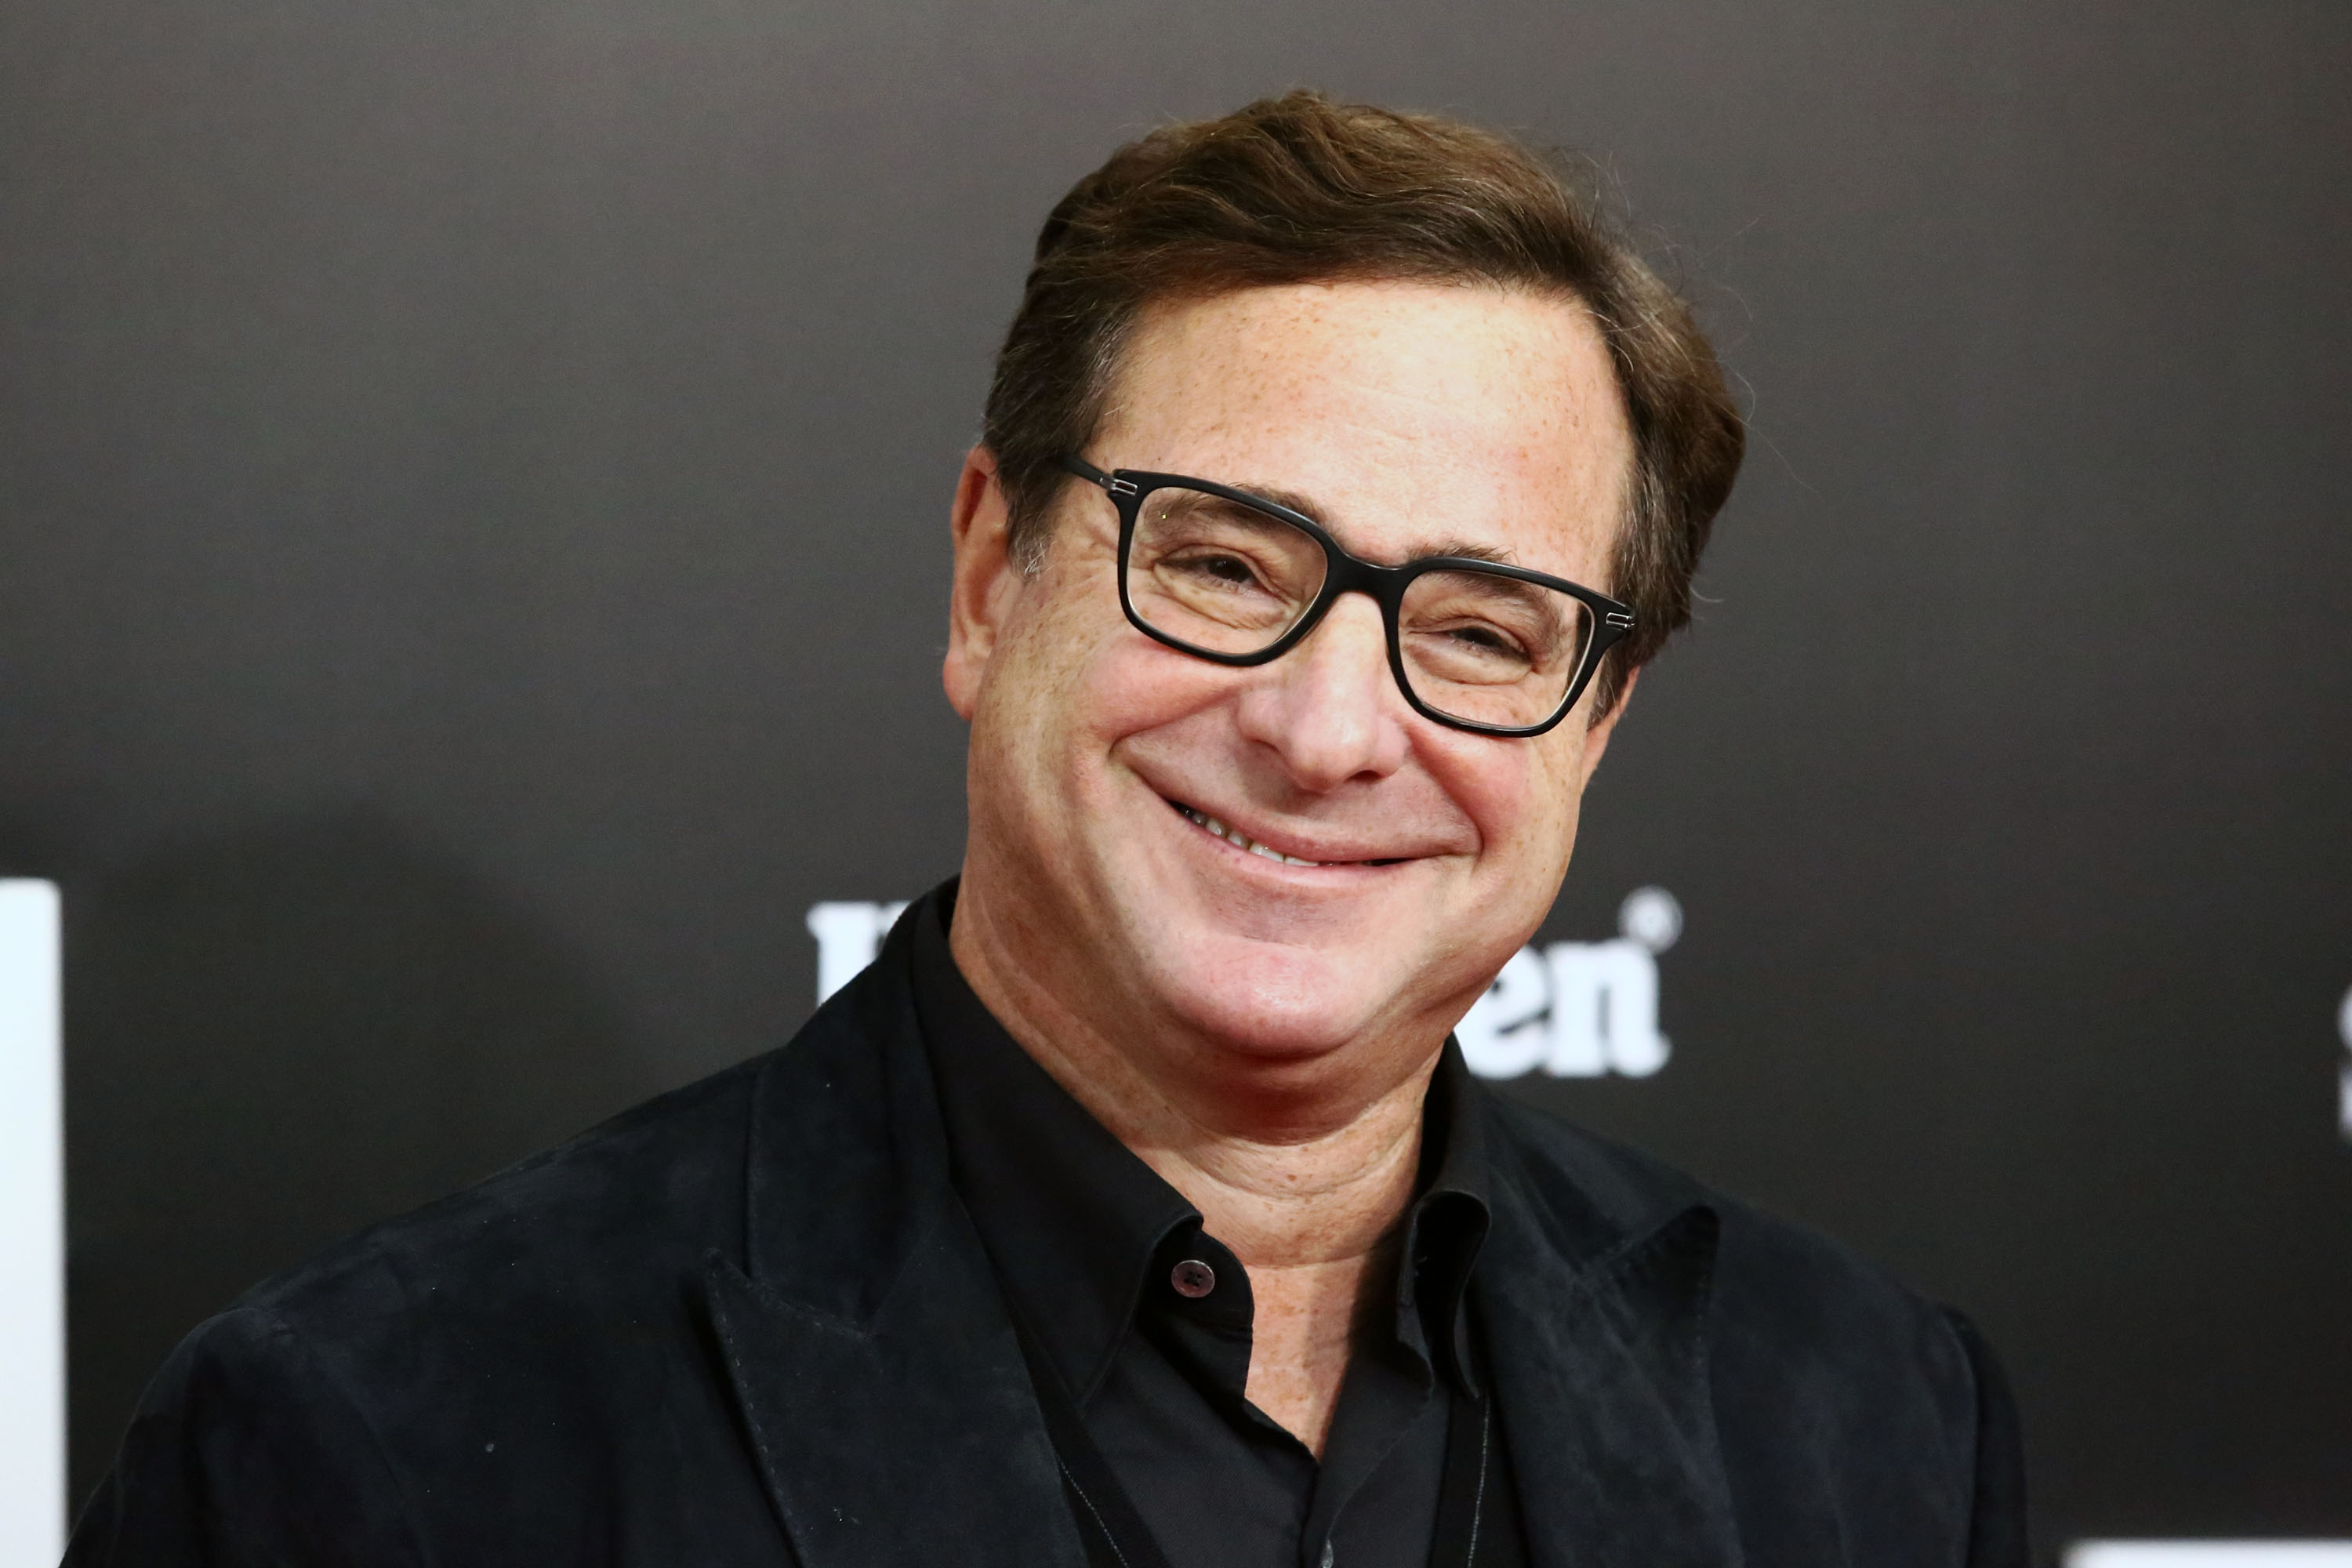 Bob Saget at "The Big Short" premiere at Ziegfeld Theater in New York City on November 23, 2015. | Source: Getty Images